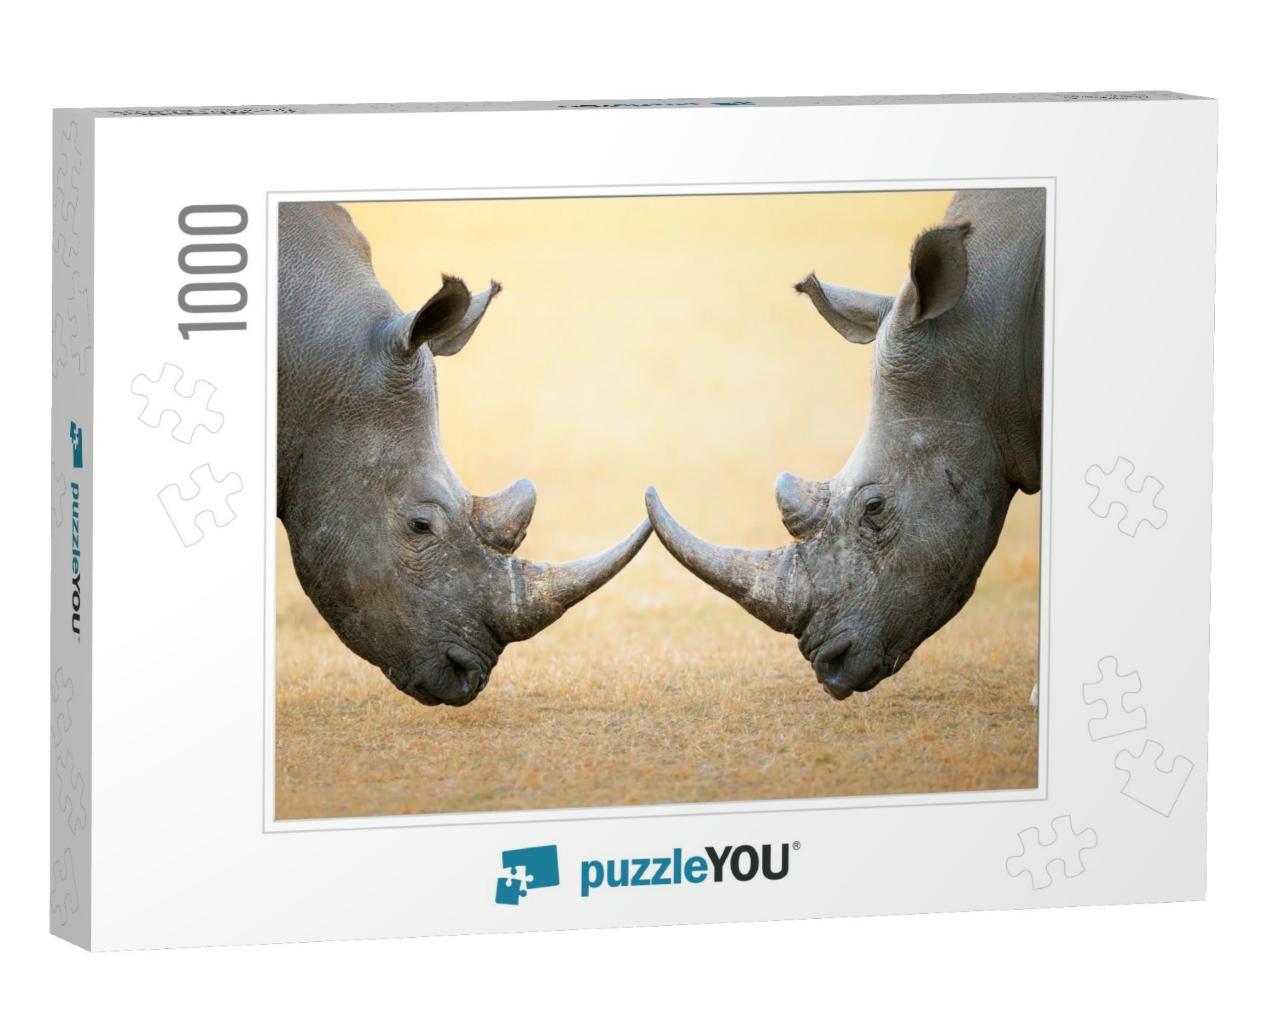 White Rhinoceros Ceratotherium Simum Head to Head - Kruge... Jigsaw Puzzle with 1000 pieces